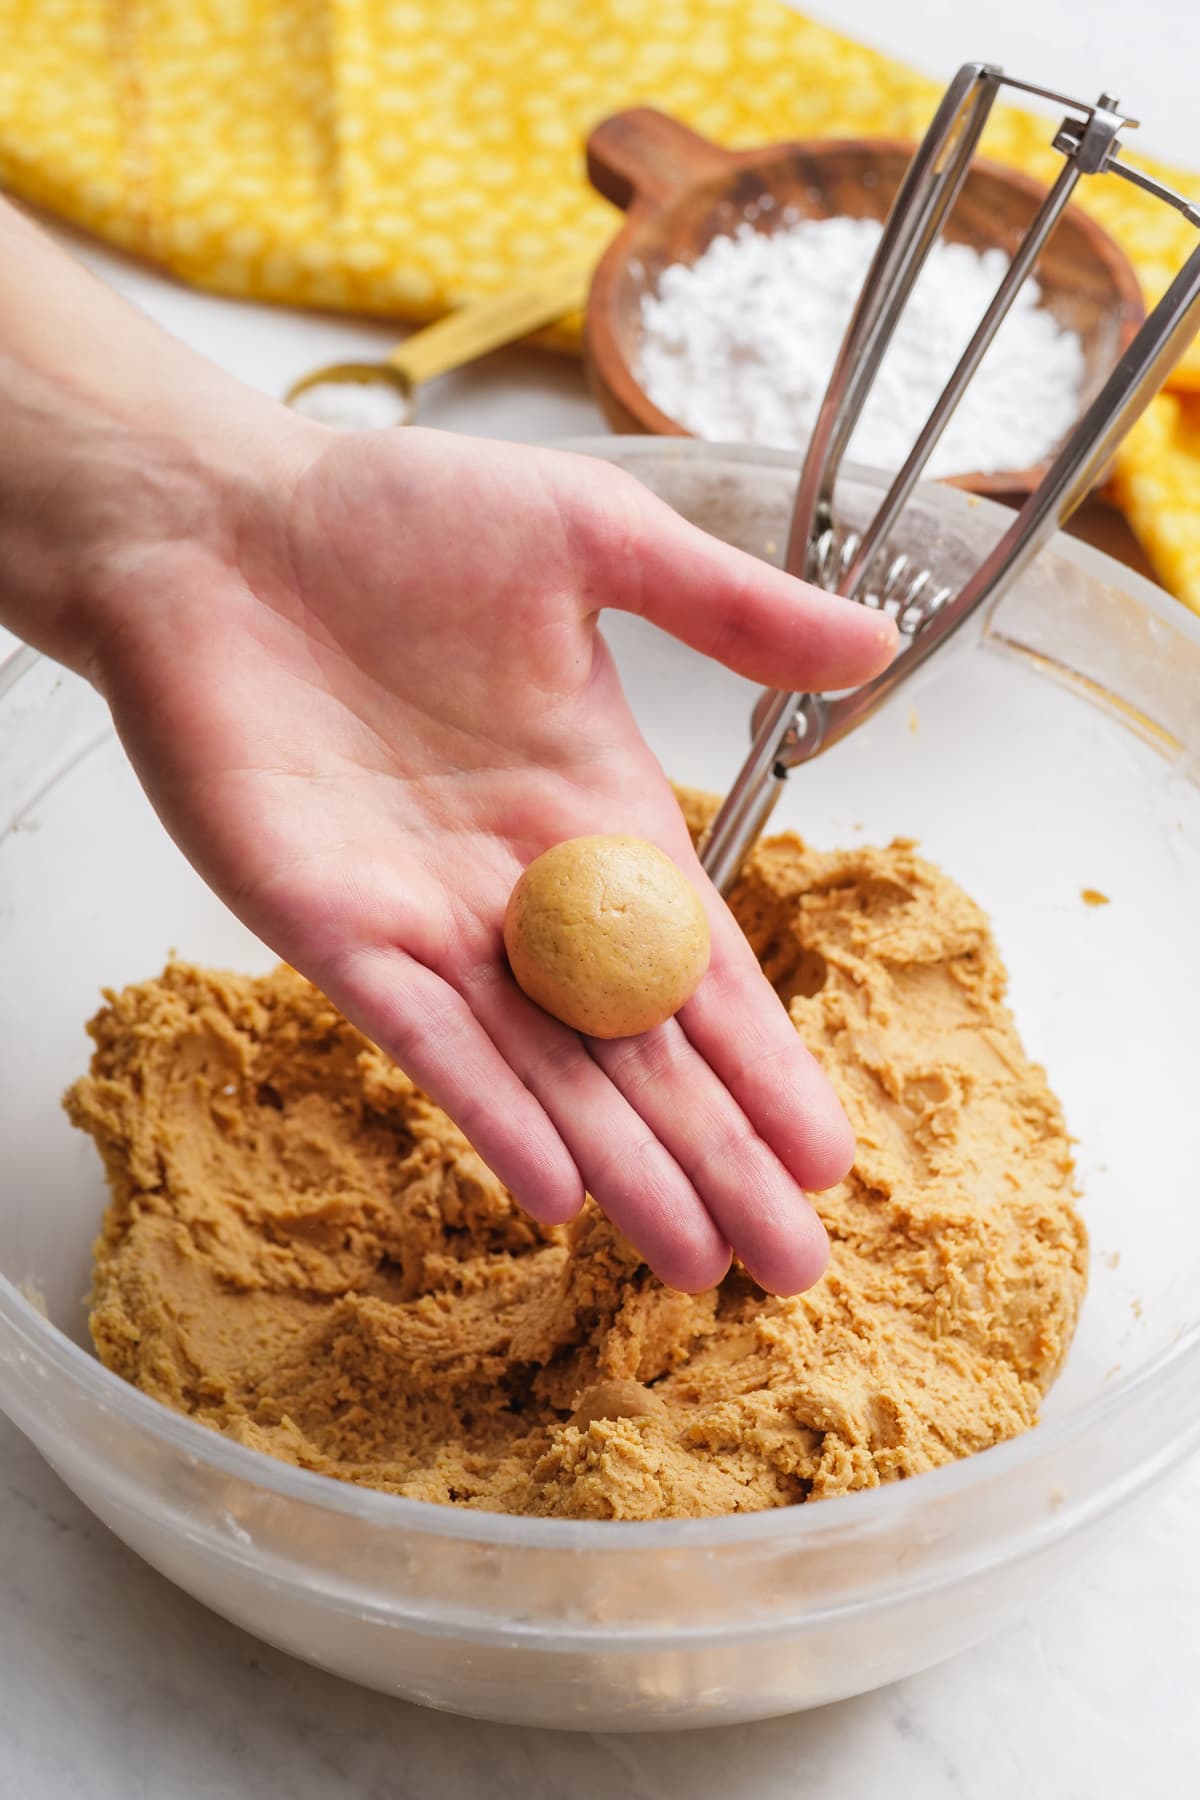 Woman's hand forms a ball of dough